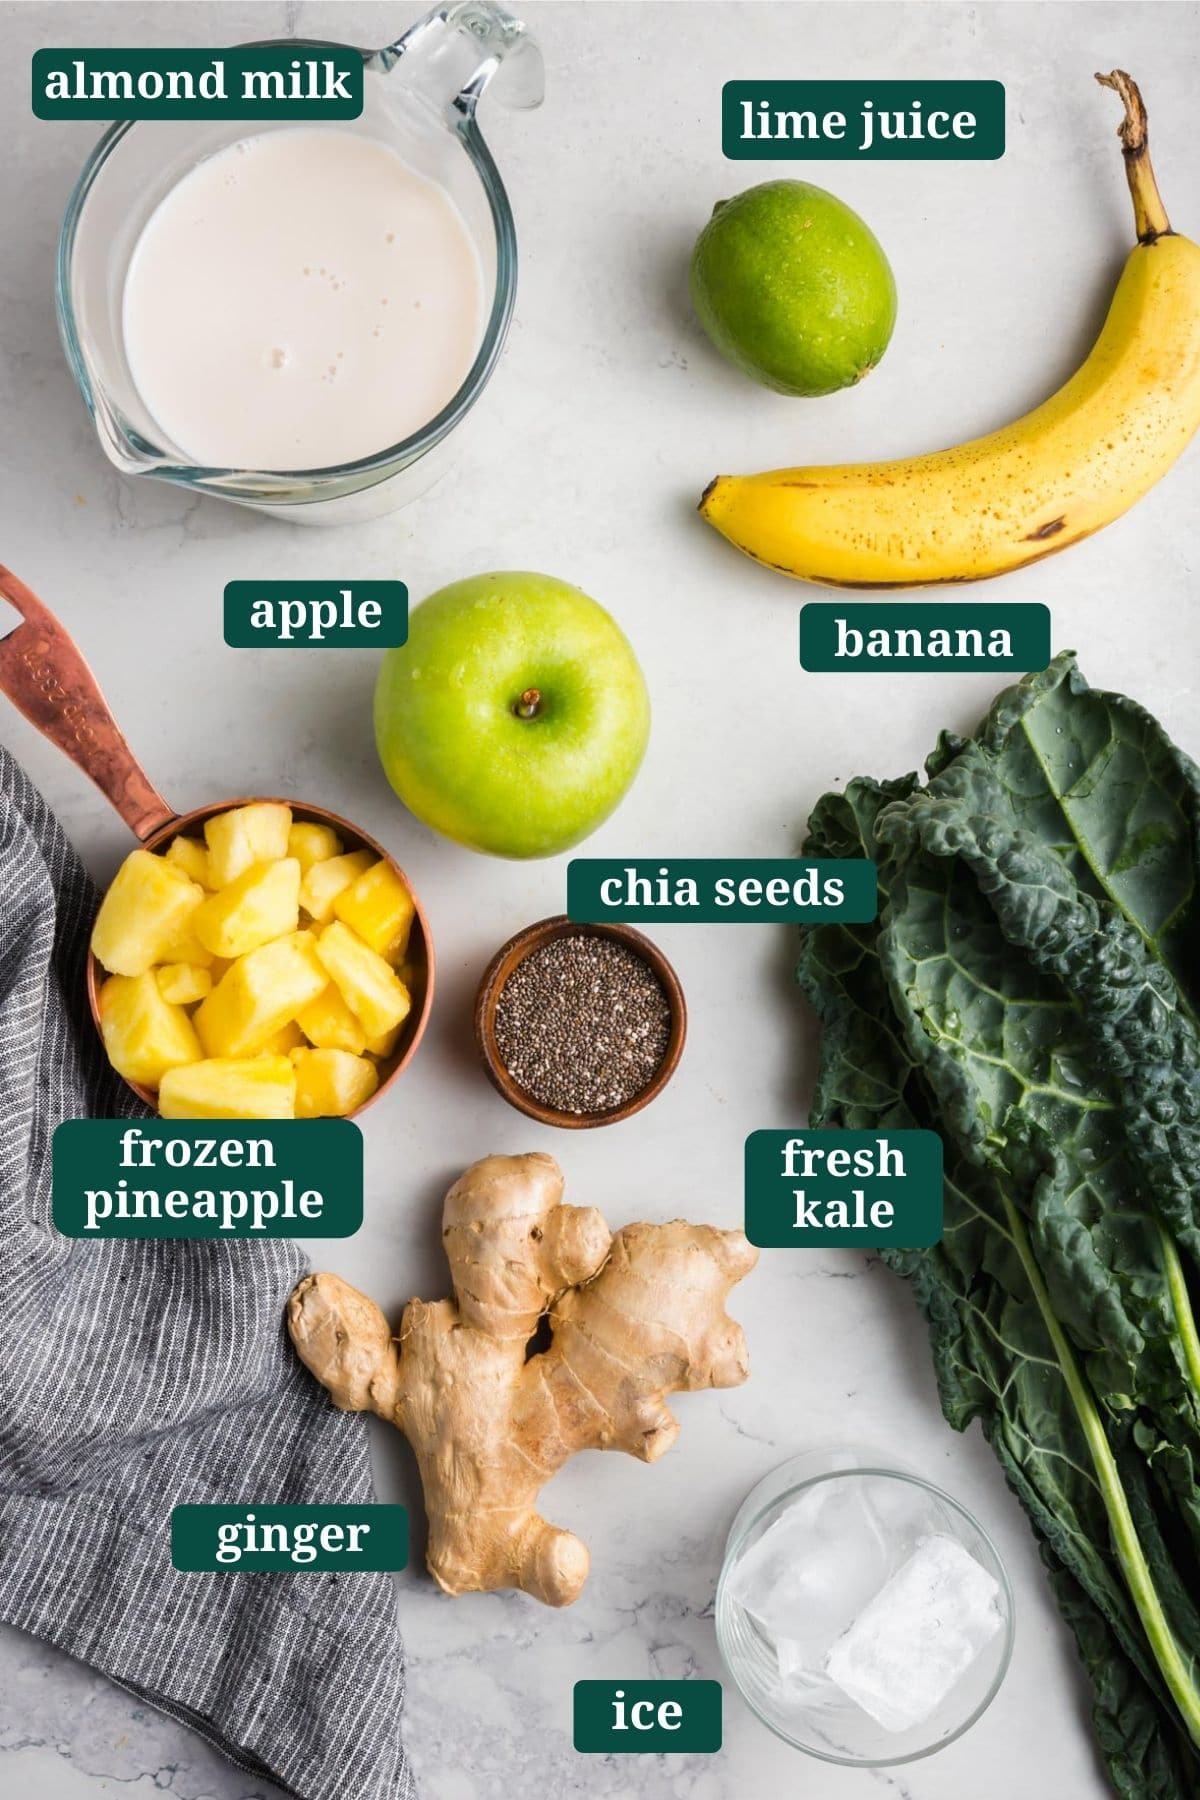 Ingredients for apple kale smoothie: banana, apple, kale, almond milk, chia seed, ginger, ice cubes, lime juice.